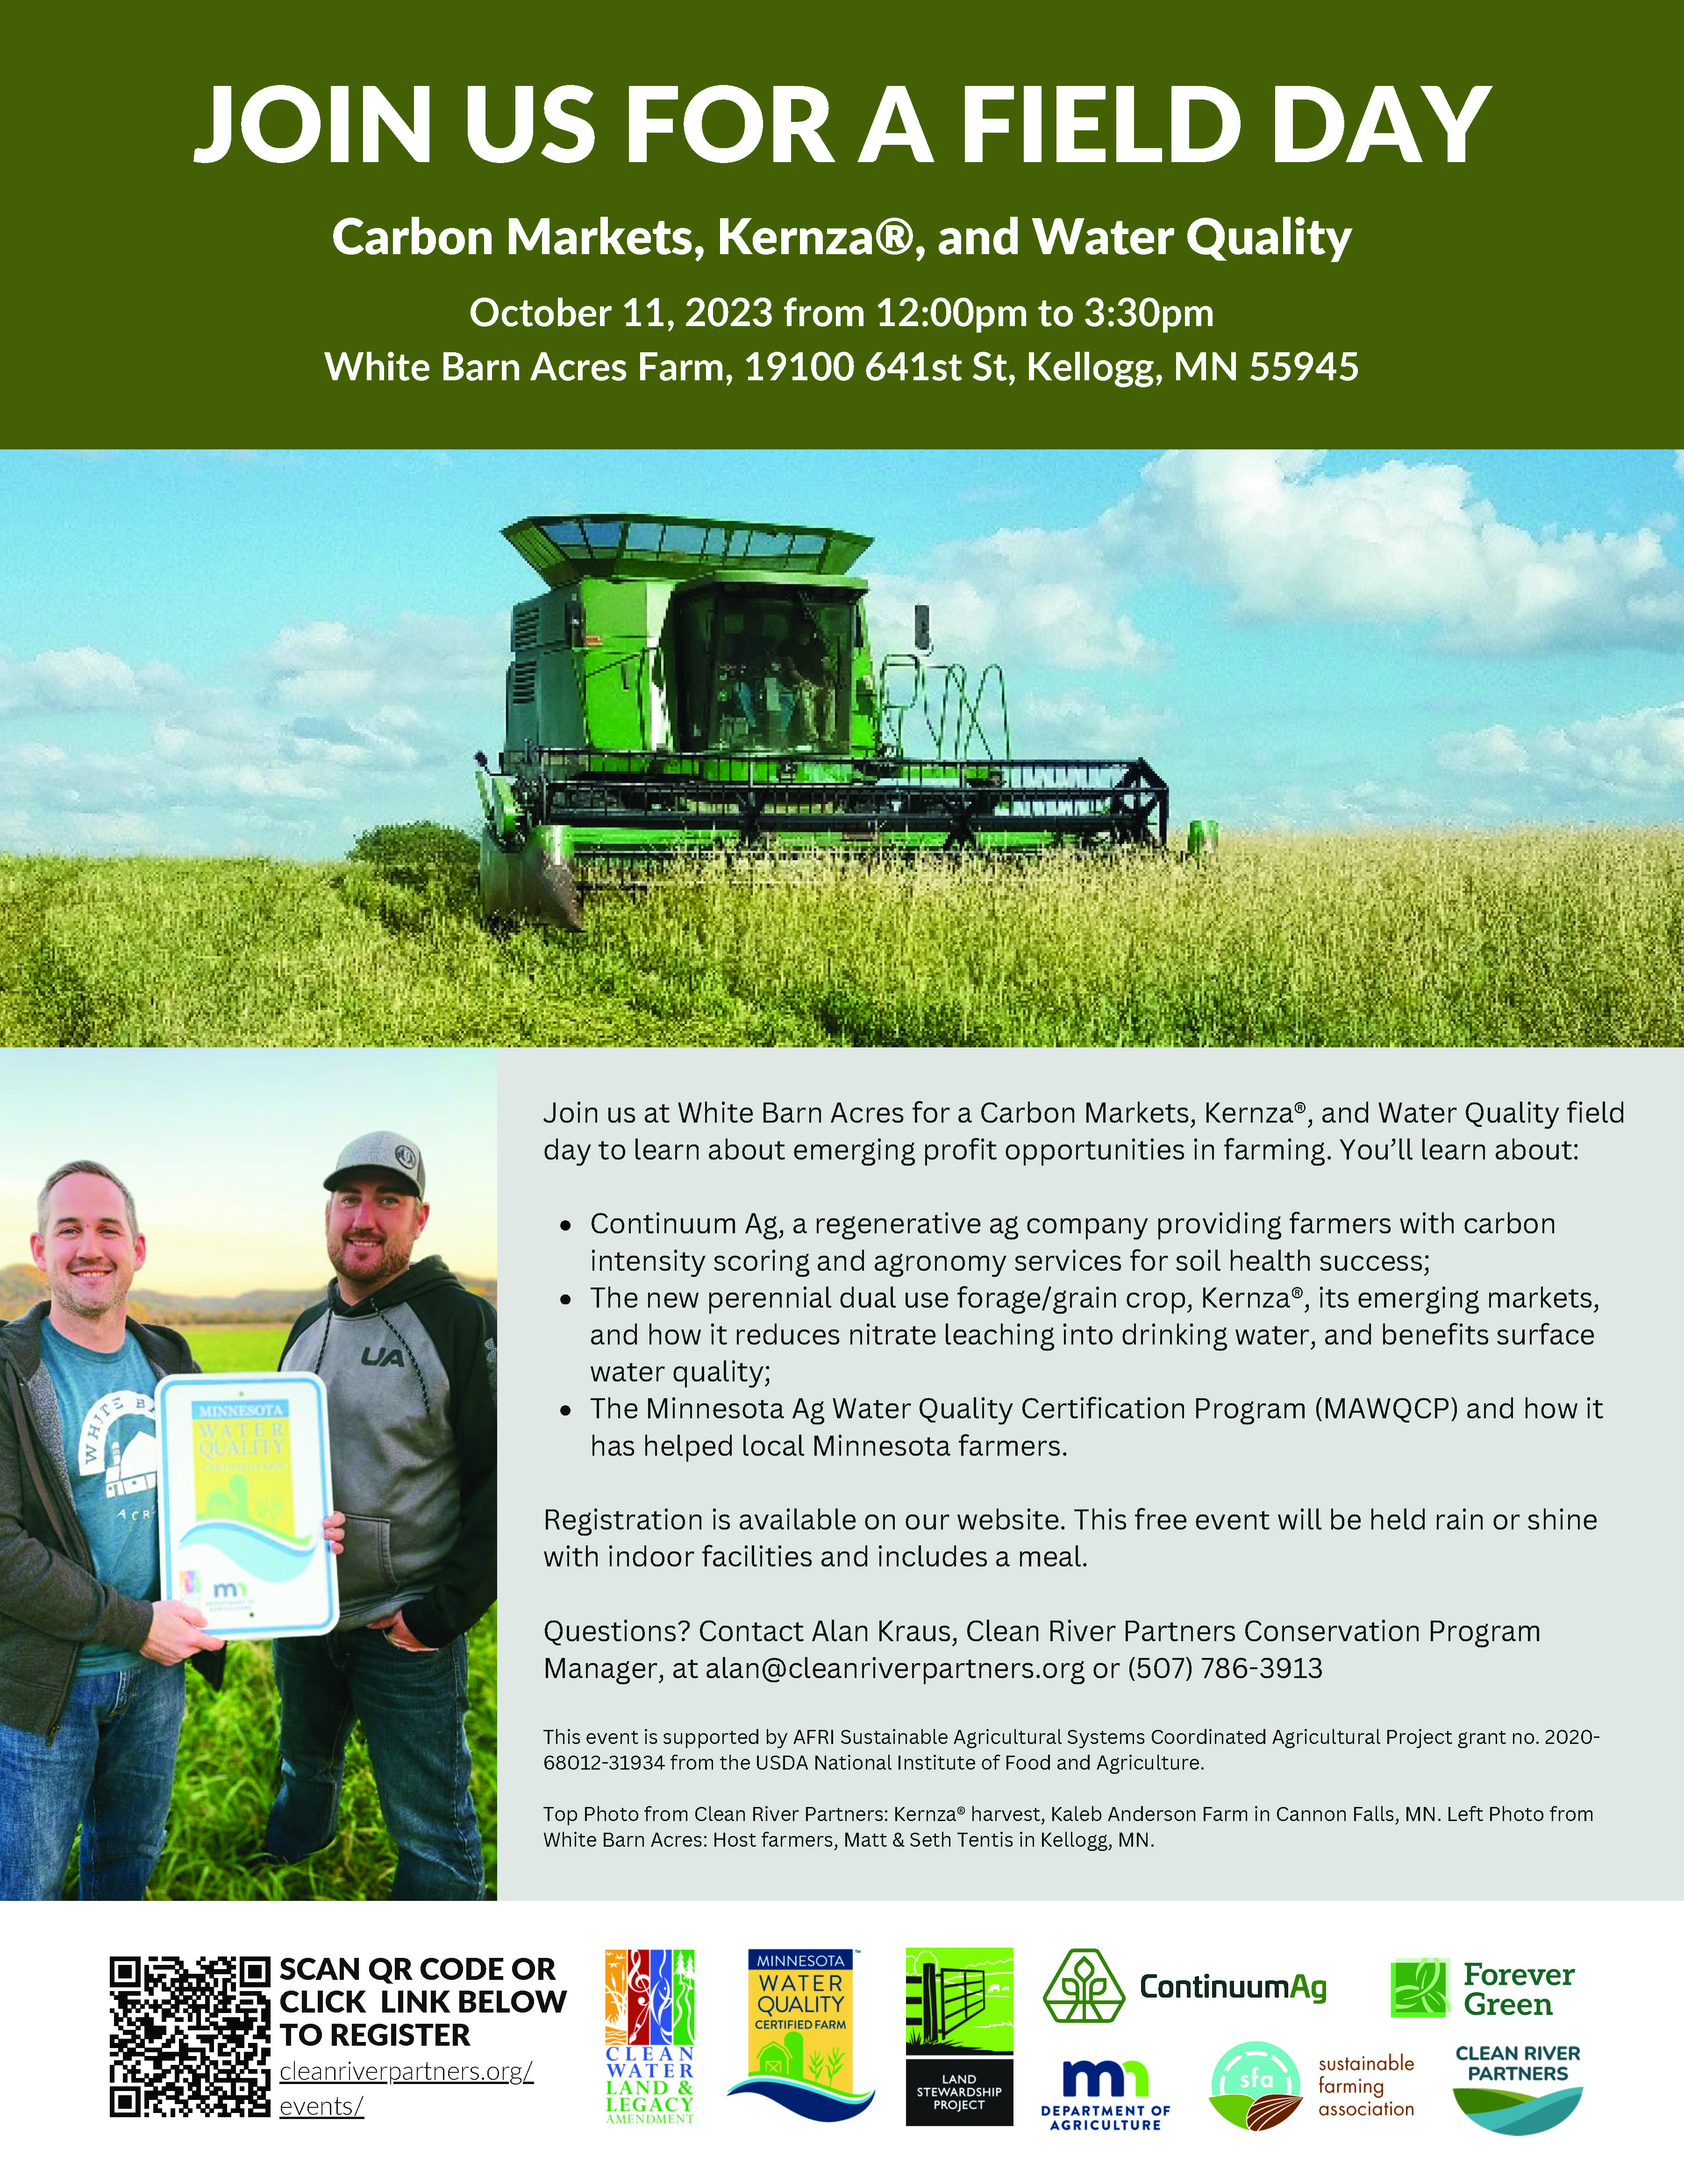 A flyer showing details of the field day slated for Oct. 11, 2023, at White Barn Acres Farm in Minnesota. These details are written in the text of the post below.